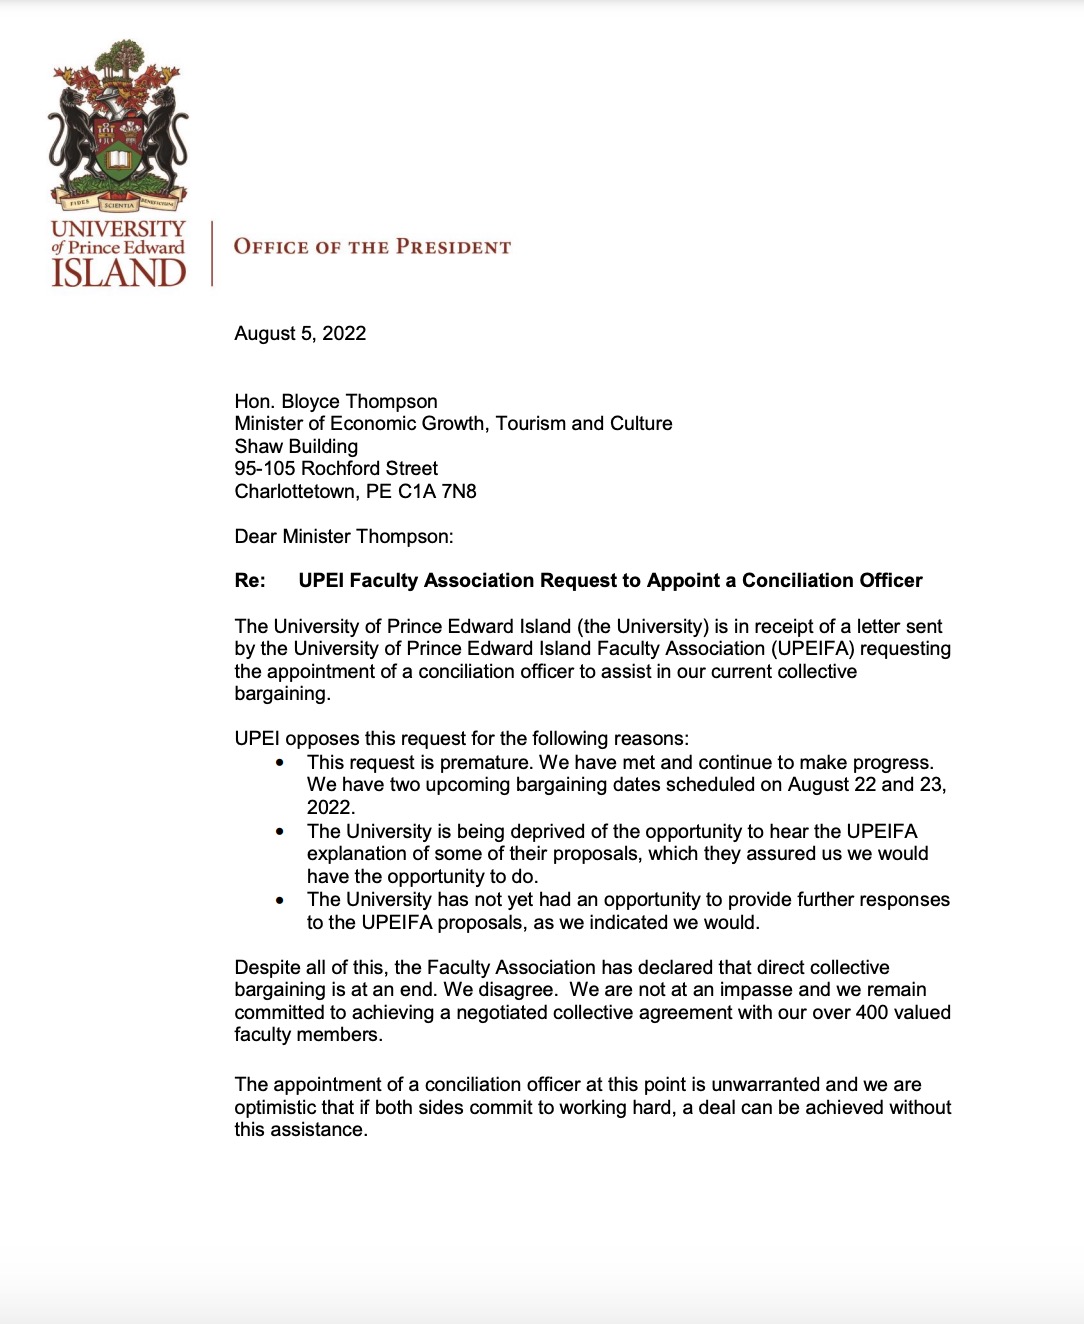 Image of letter from the Office of the President